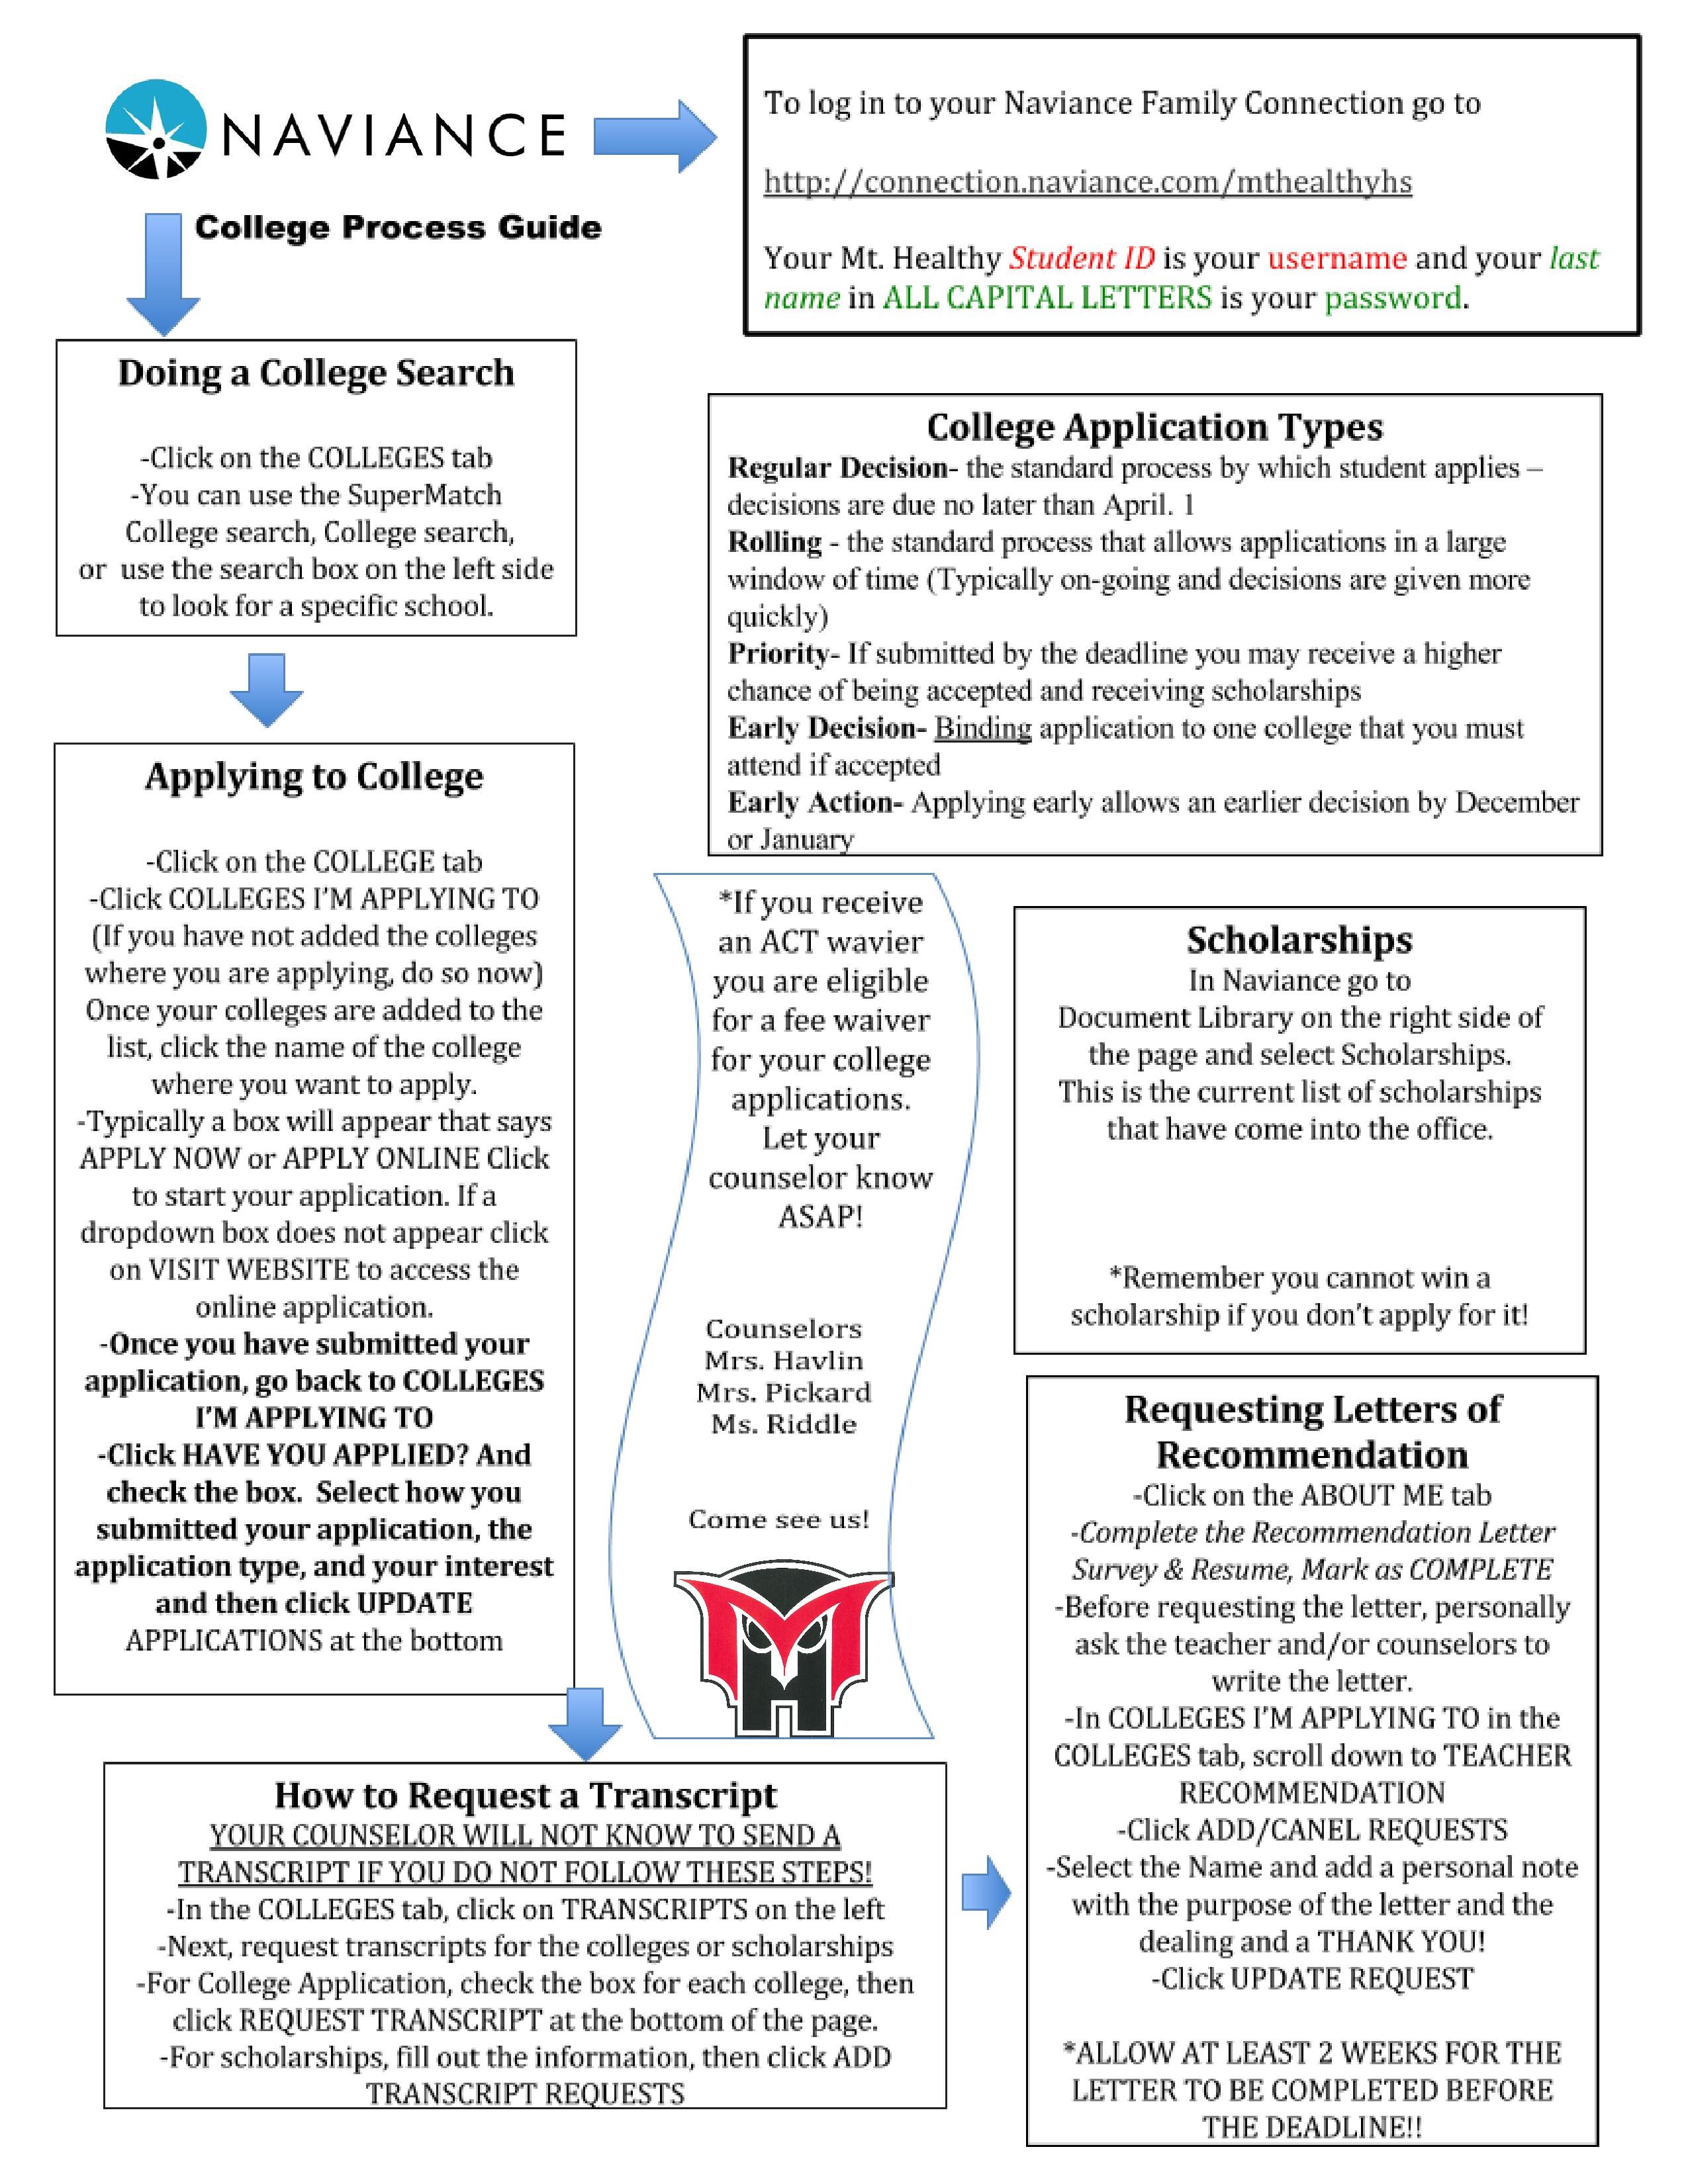 College application guide